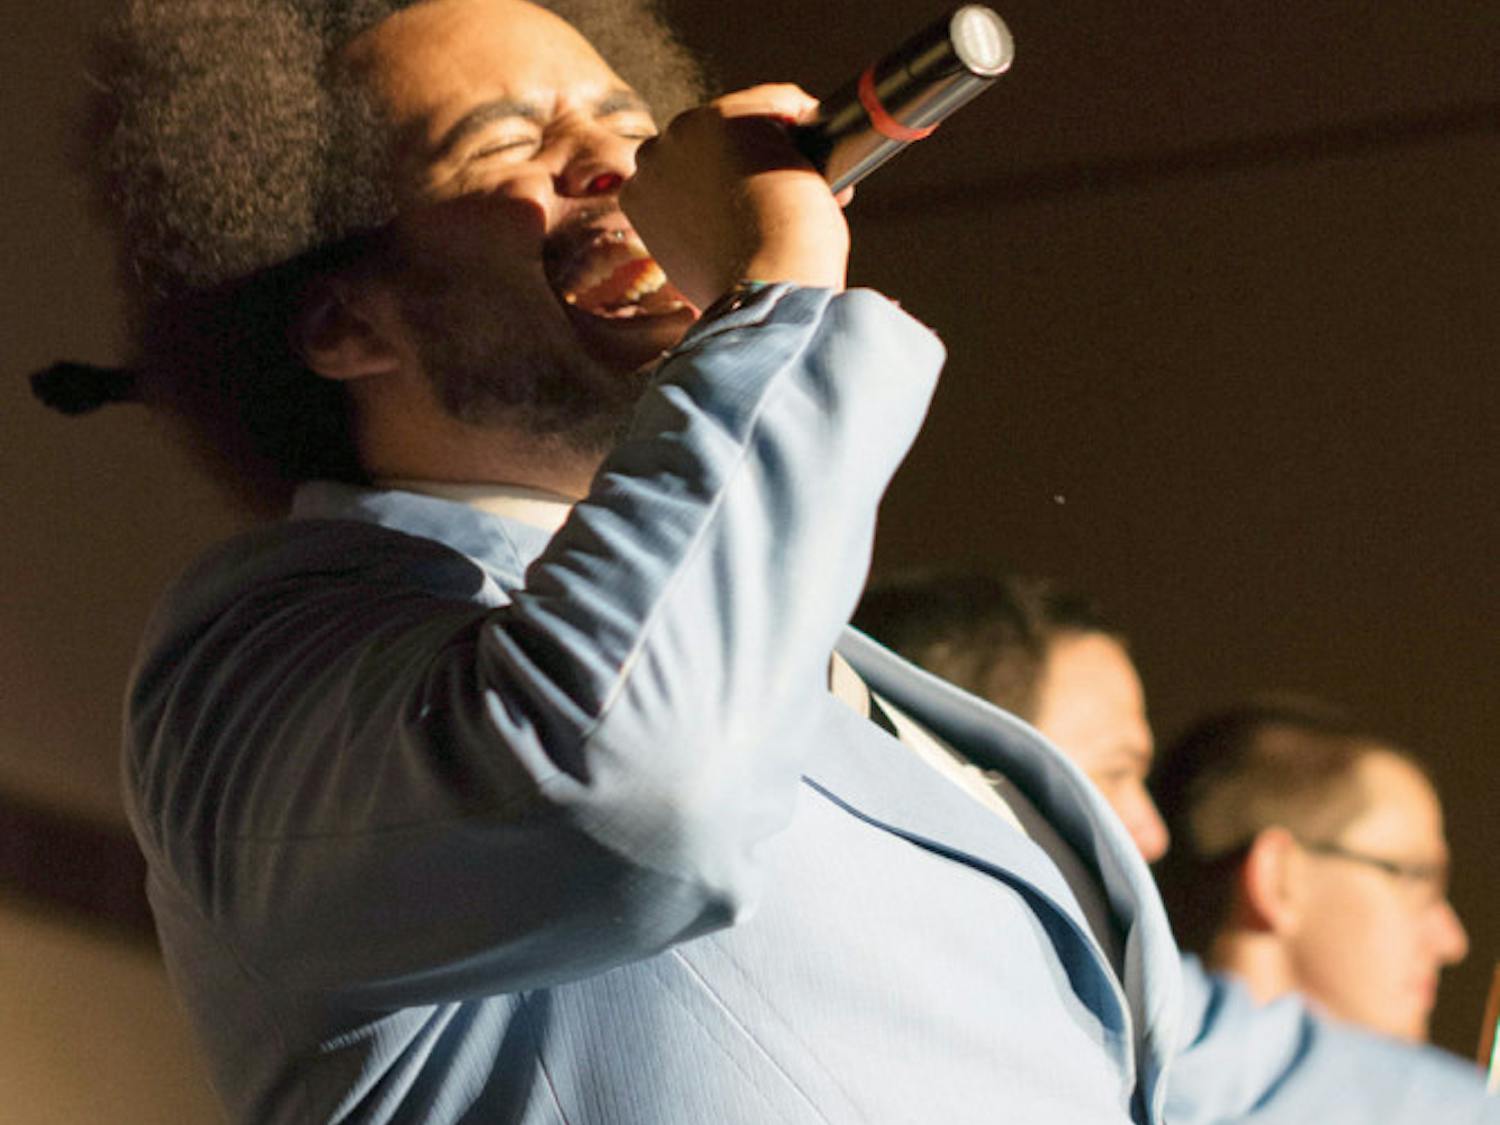 Justin McKenzie, the 25-year-old lead male singer, sings with his band The Savants of Soul in the Reitz Union Grand Ballroom on Tuesday night. The Savants of Soul are a 10-member local band that plays soul music.